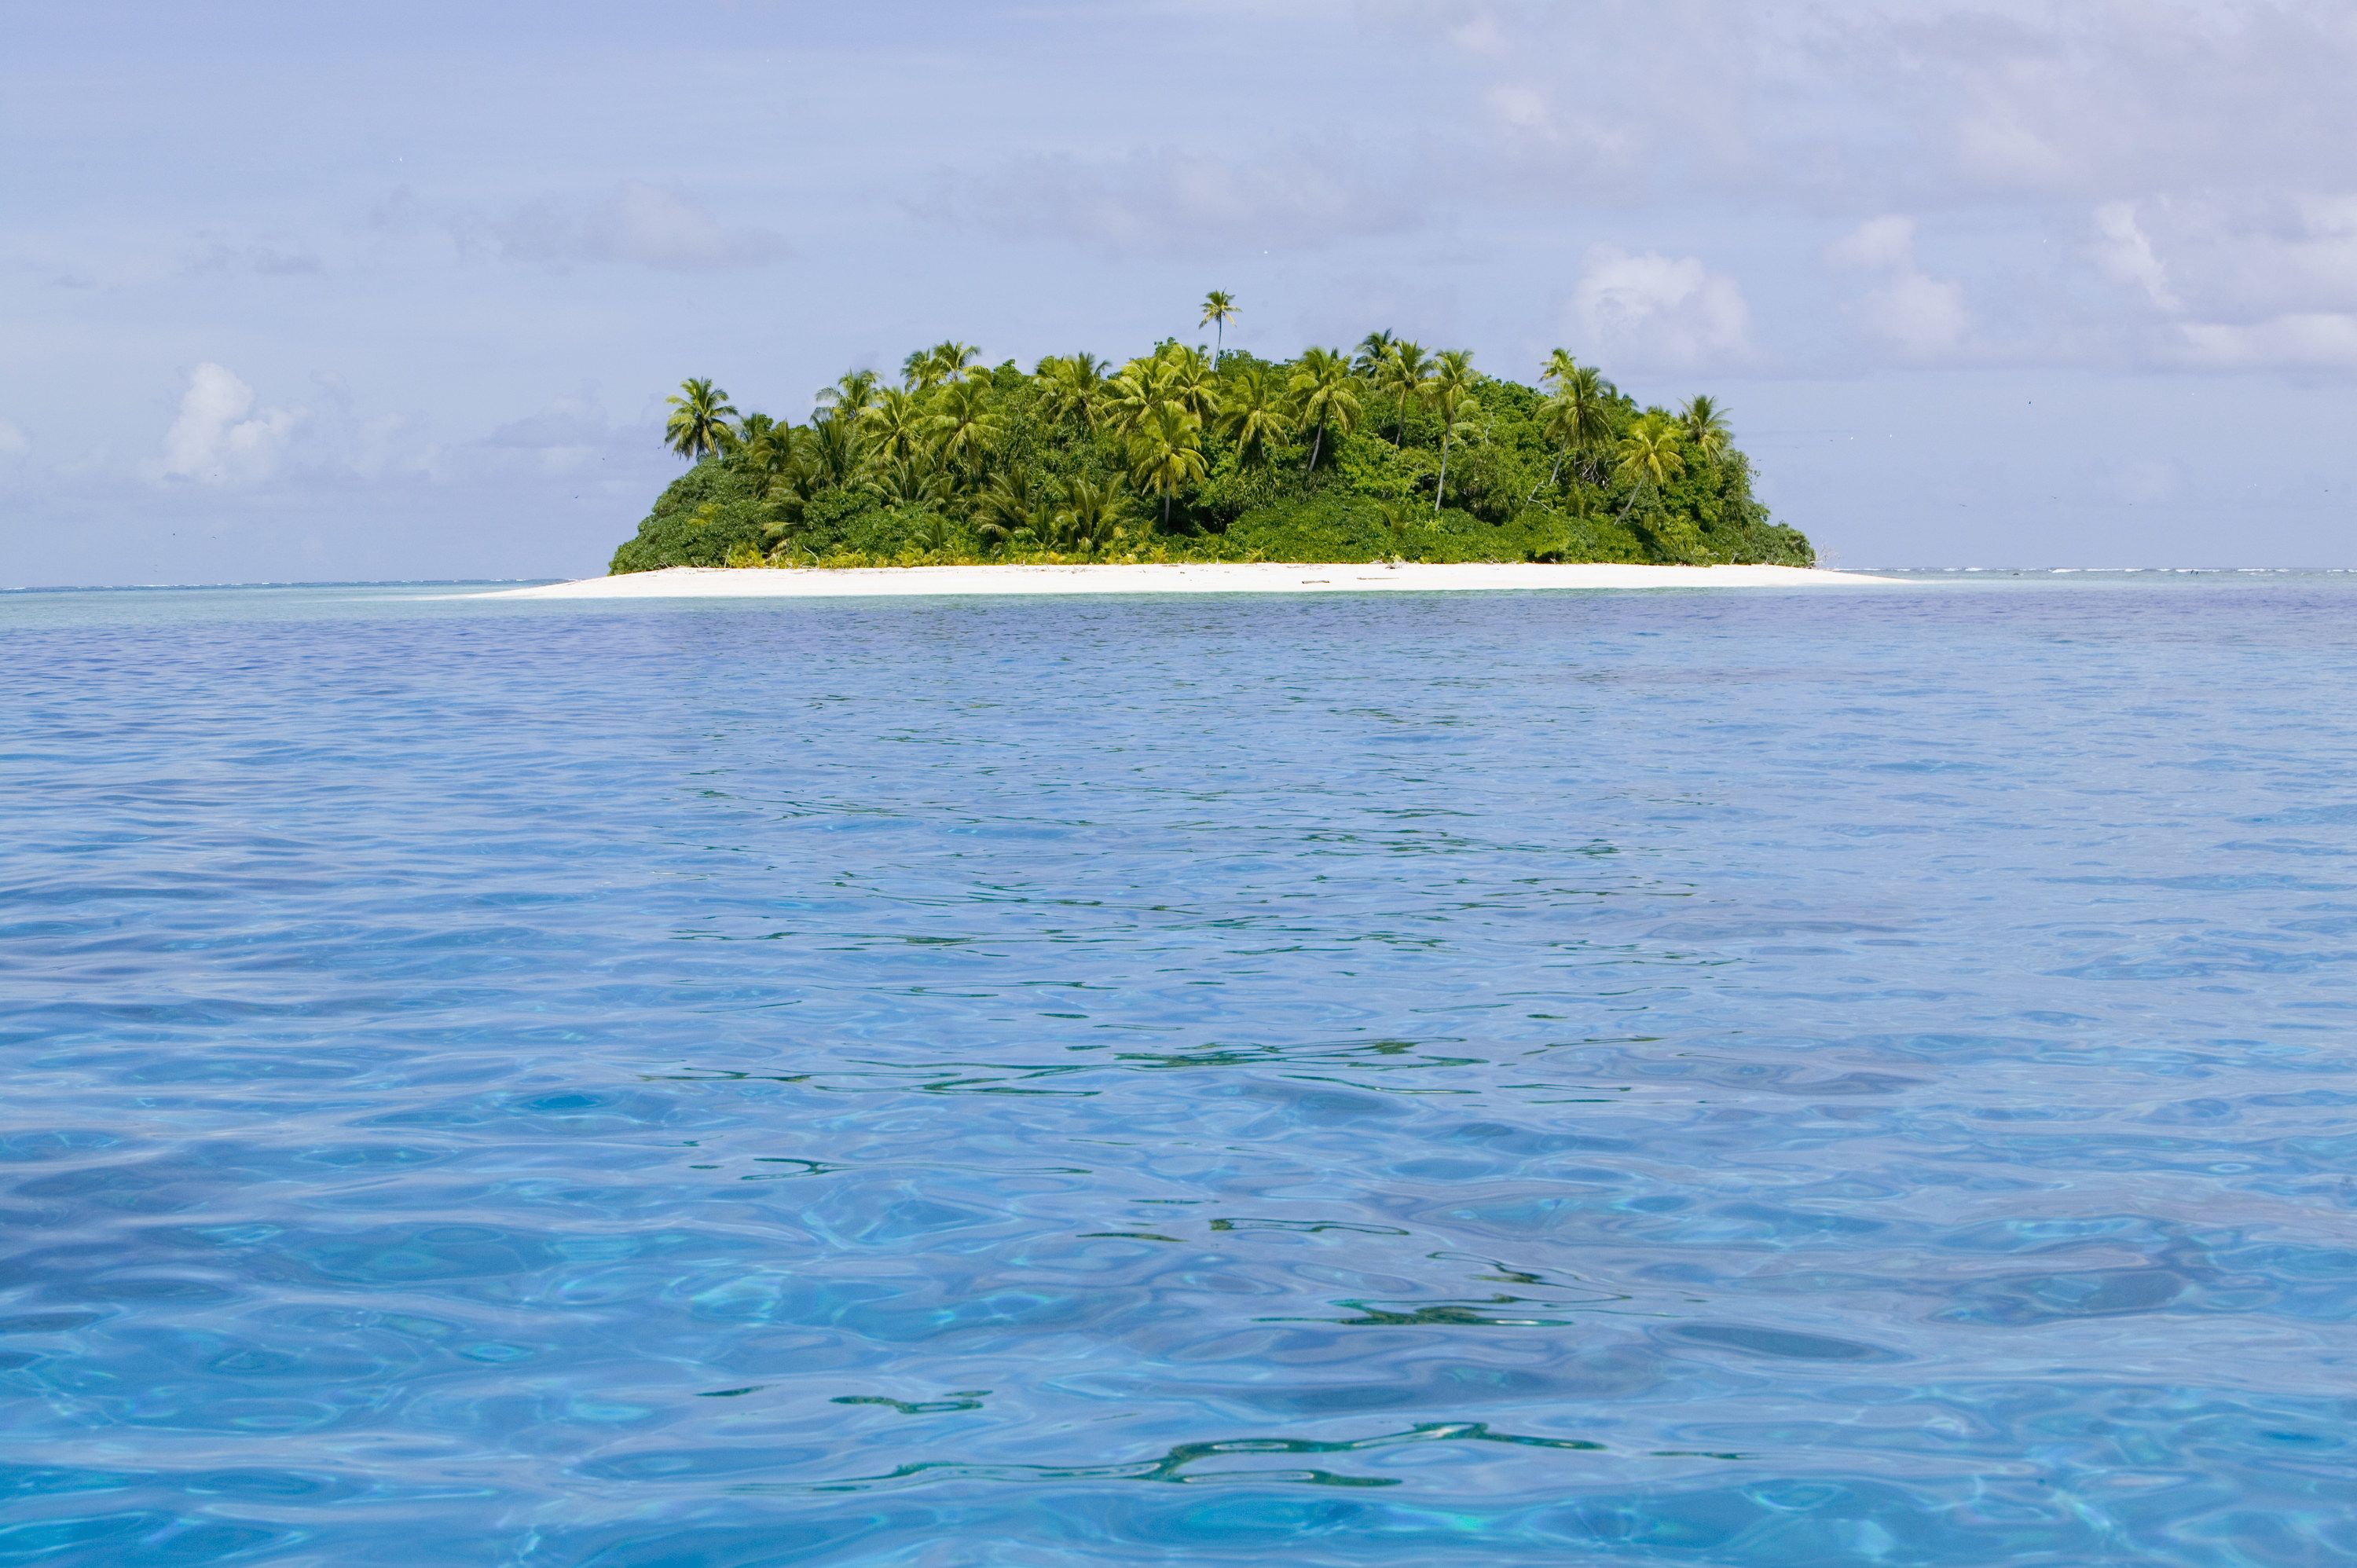 Teafualiku island, off Funafuti, Tuvalu, one of a series of low lying islands that are threatened by global warming induced sea level rise